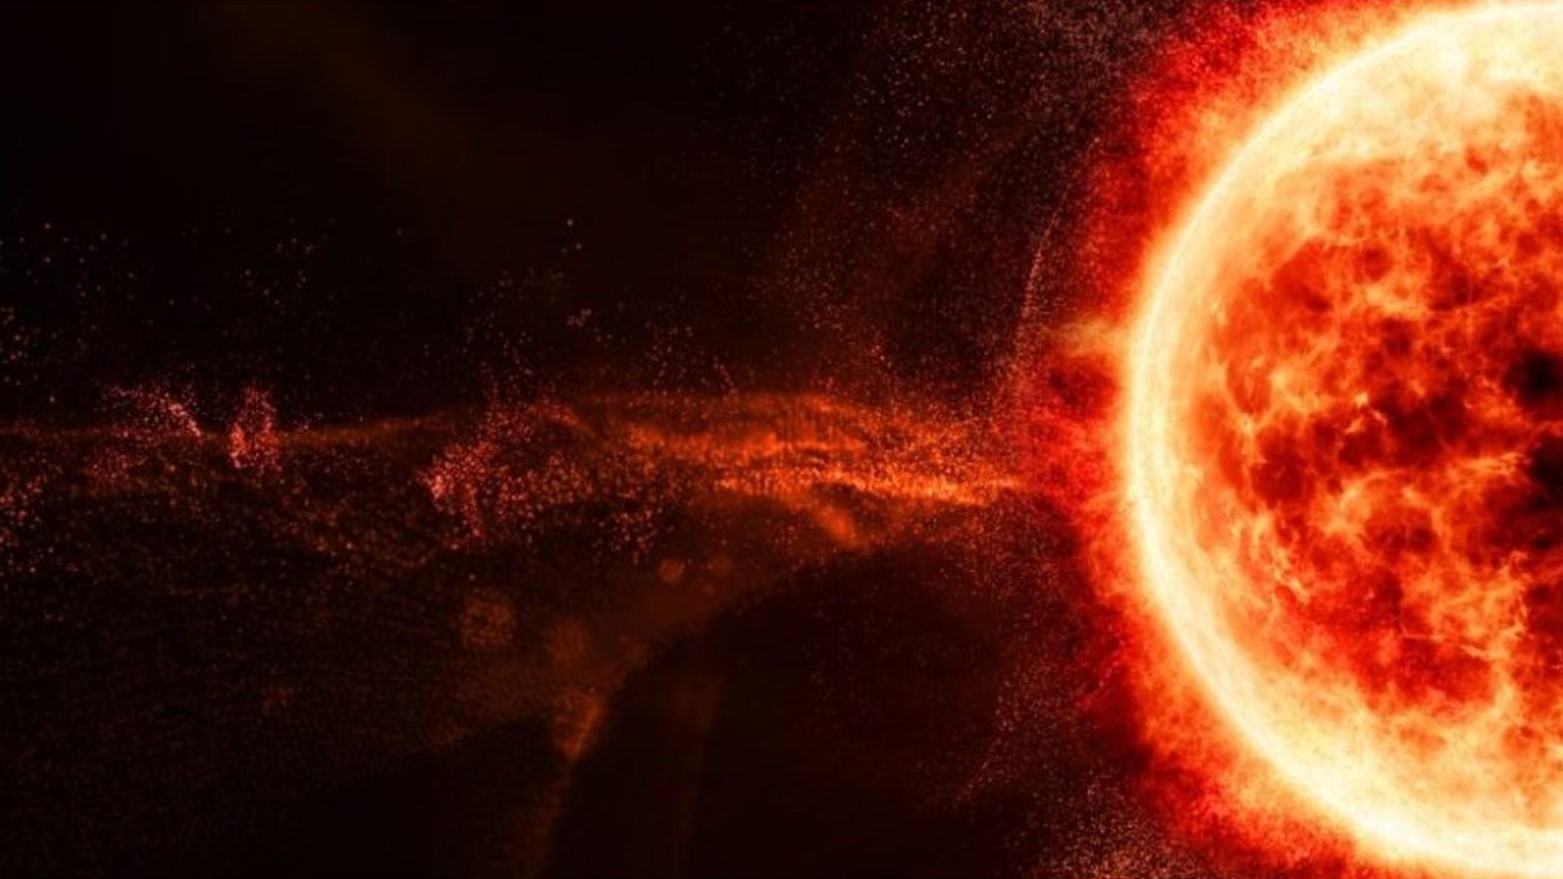 Unexpected solar storm with 'disruptive potential' slams into Earth